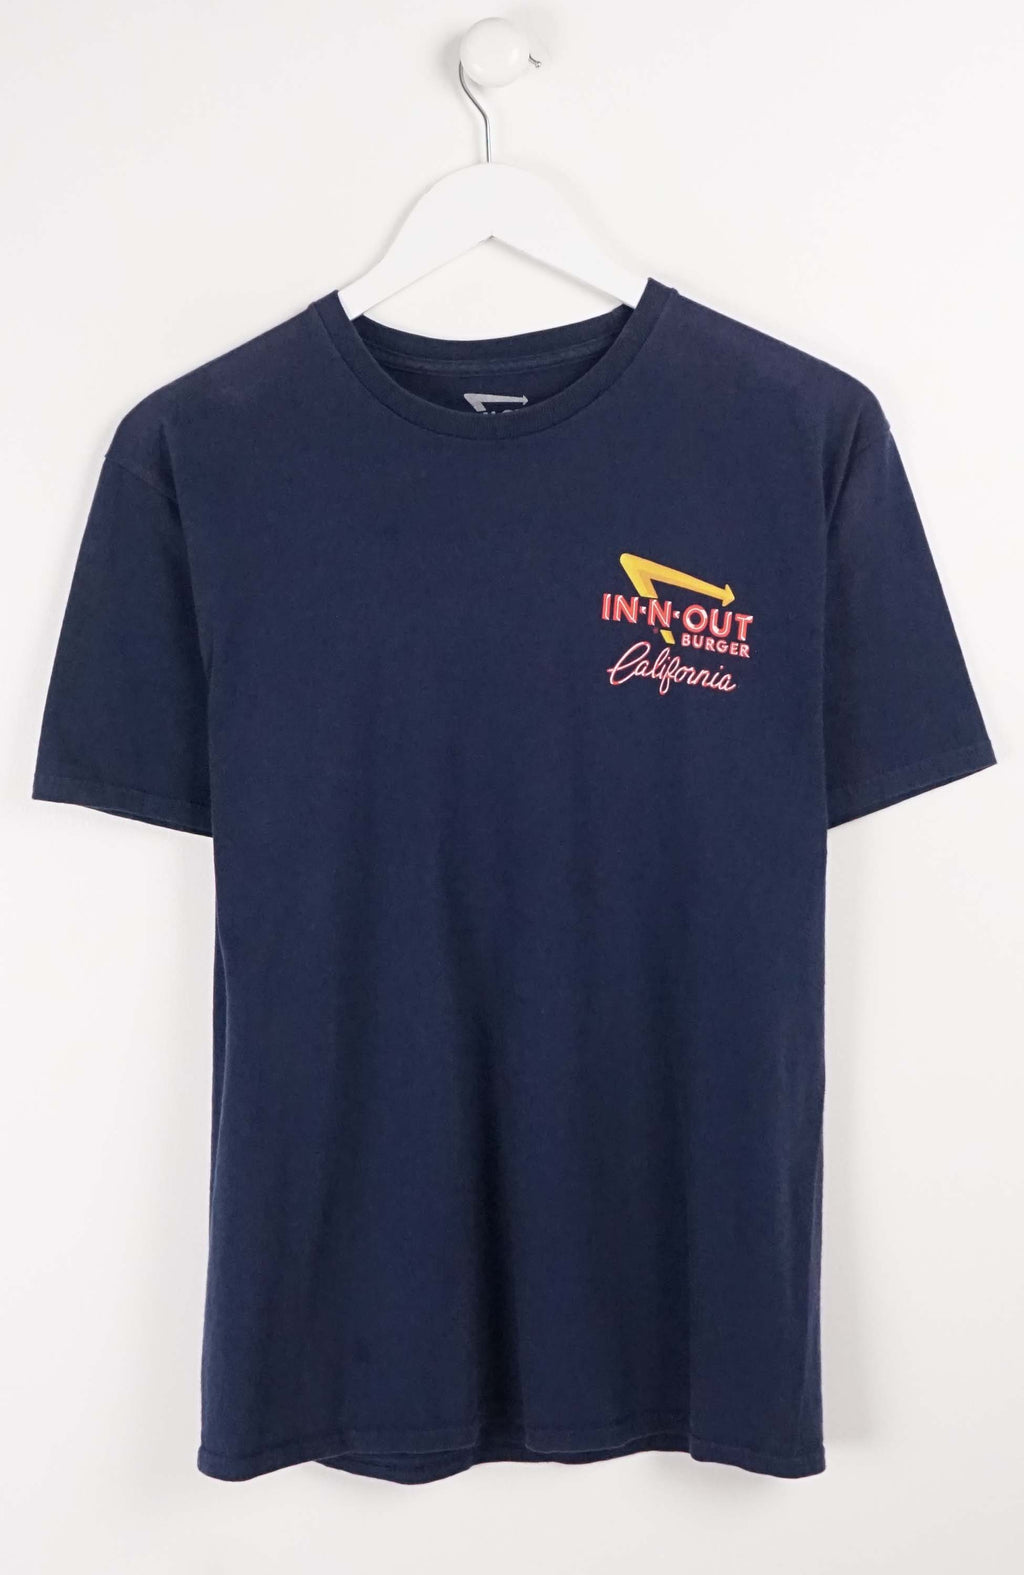 VINTAGE IN-N-OUT T-SHIRT (S)